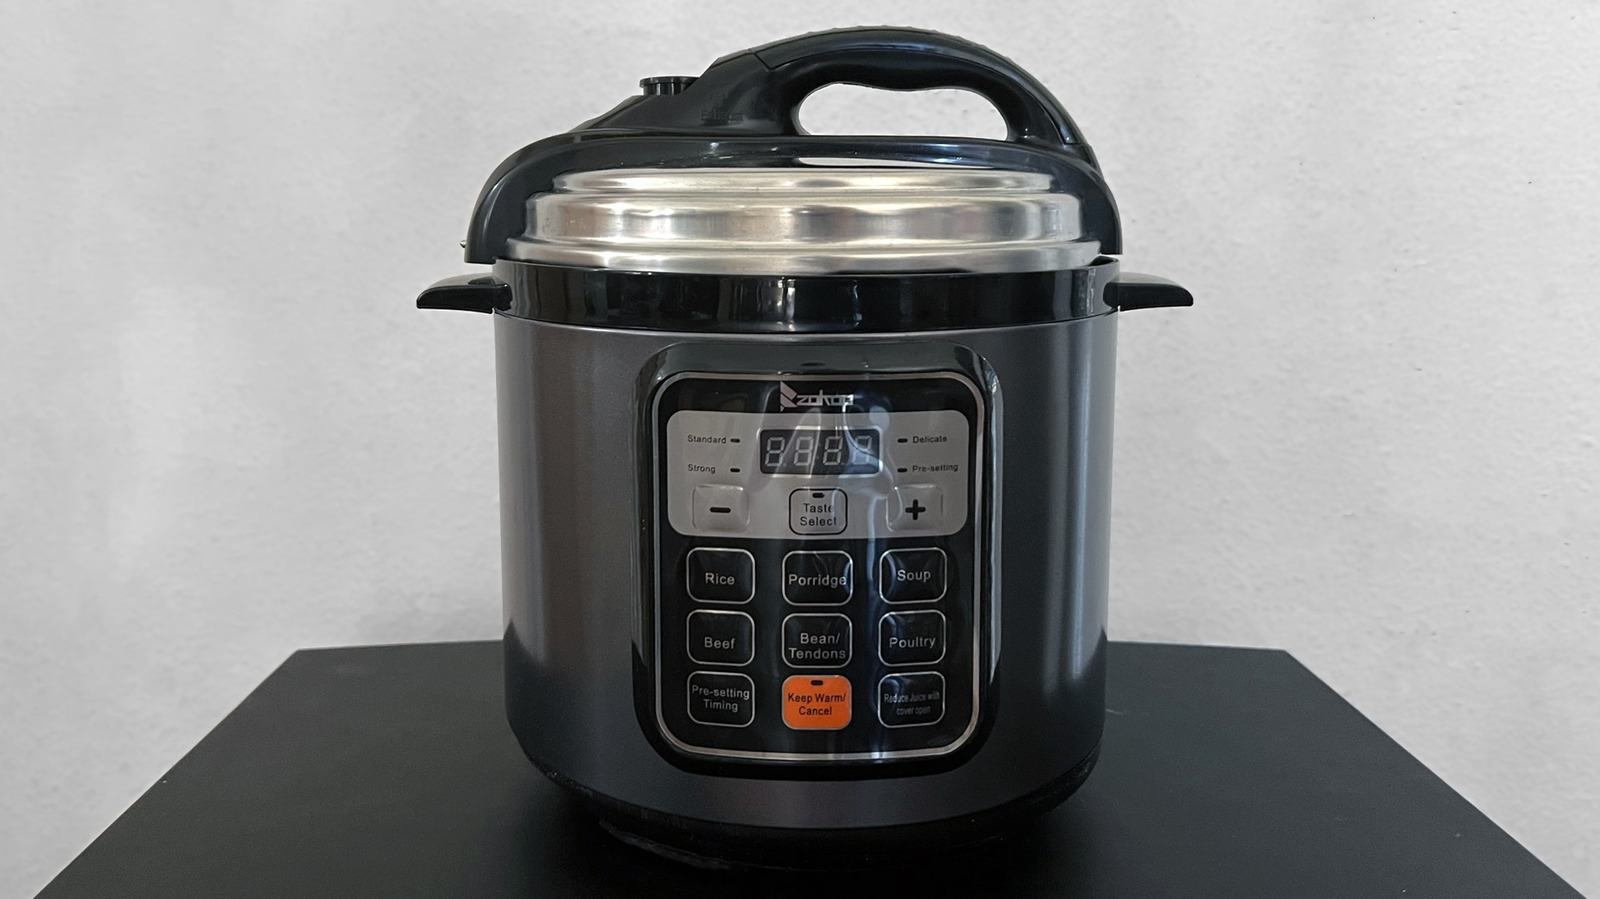 We Tried The Cheapest Instant Pot Knockoff On Amazon. Here's How It Went